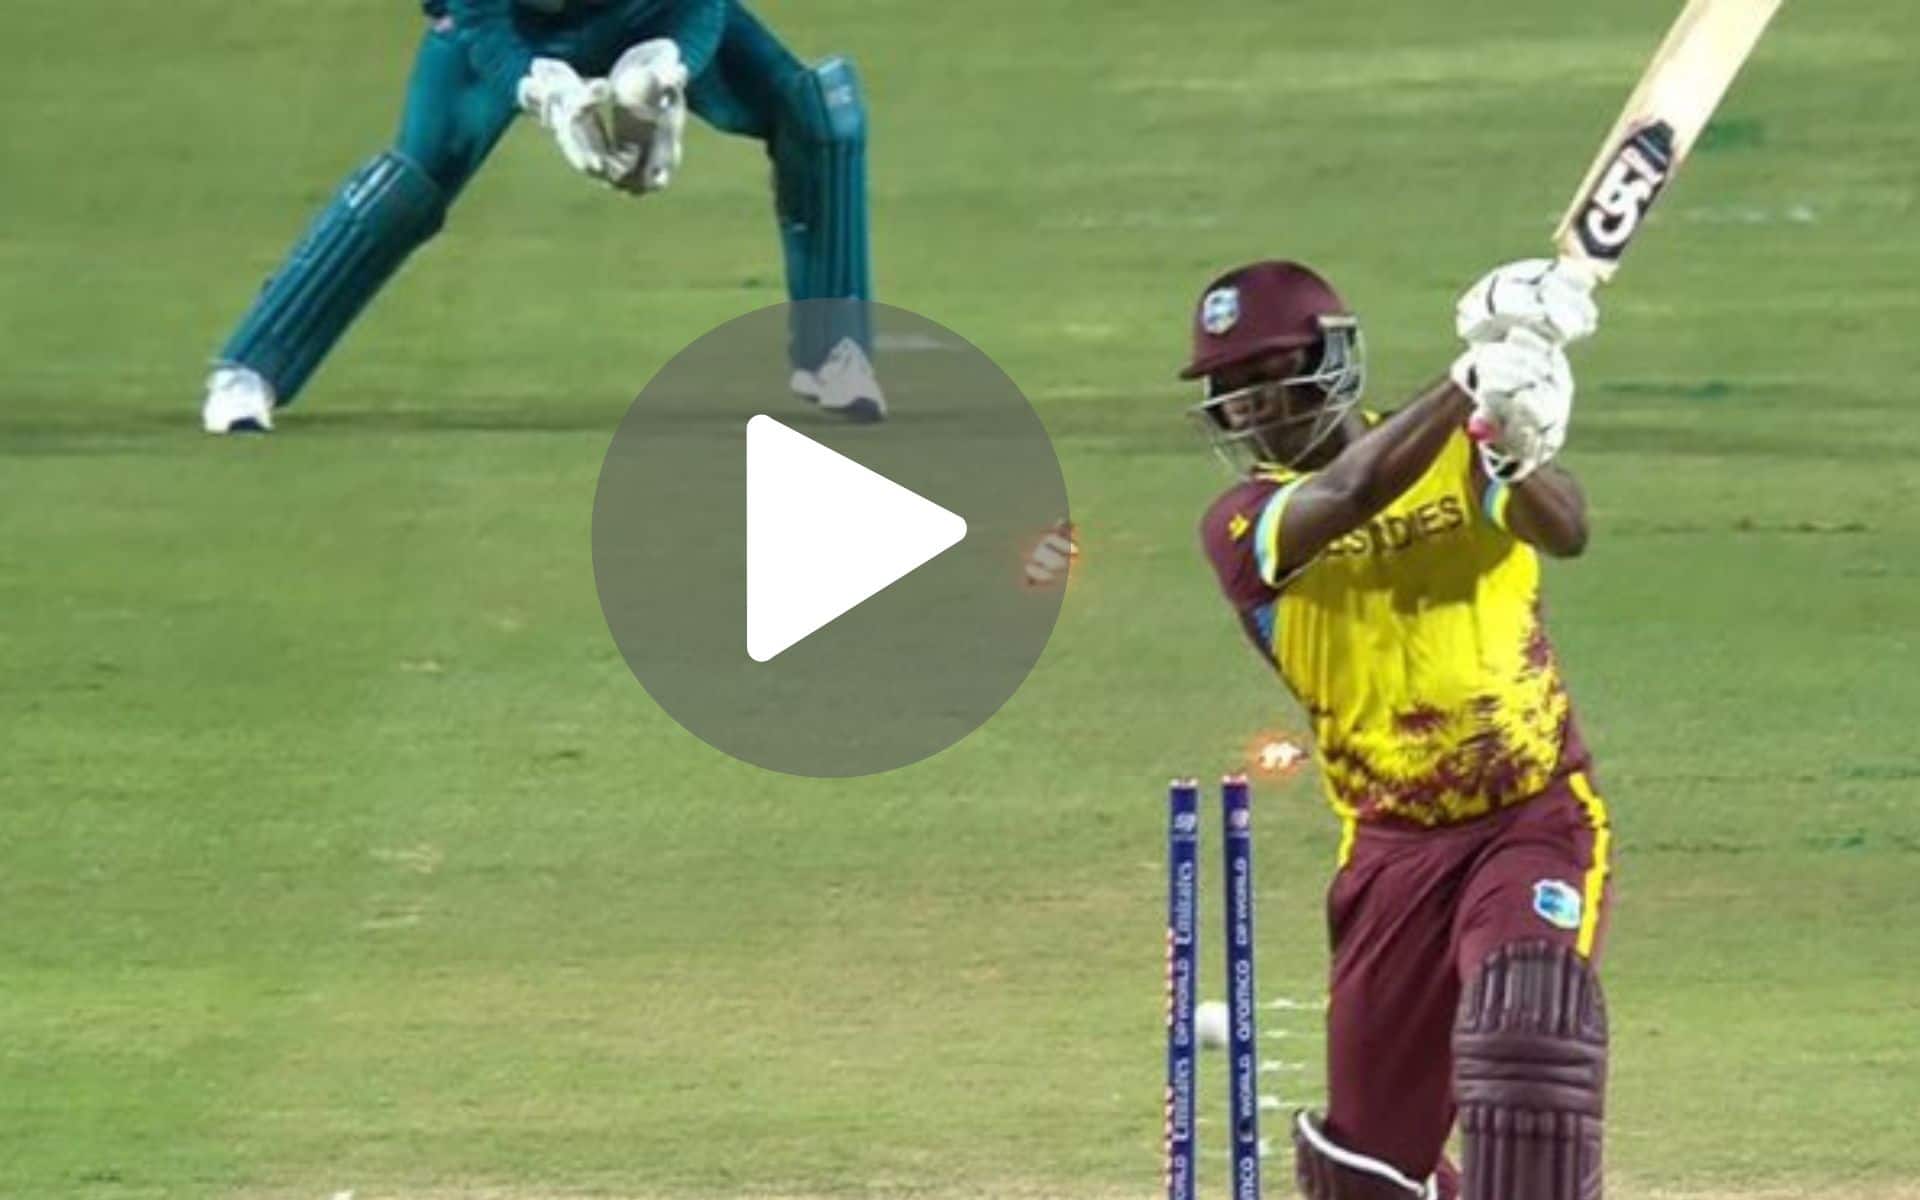 [Watch] Trent Boult Shows His Class And Bamboozles Johnson Charles For Duck